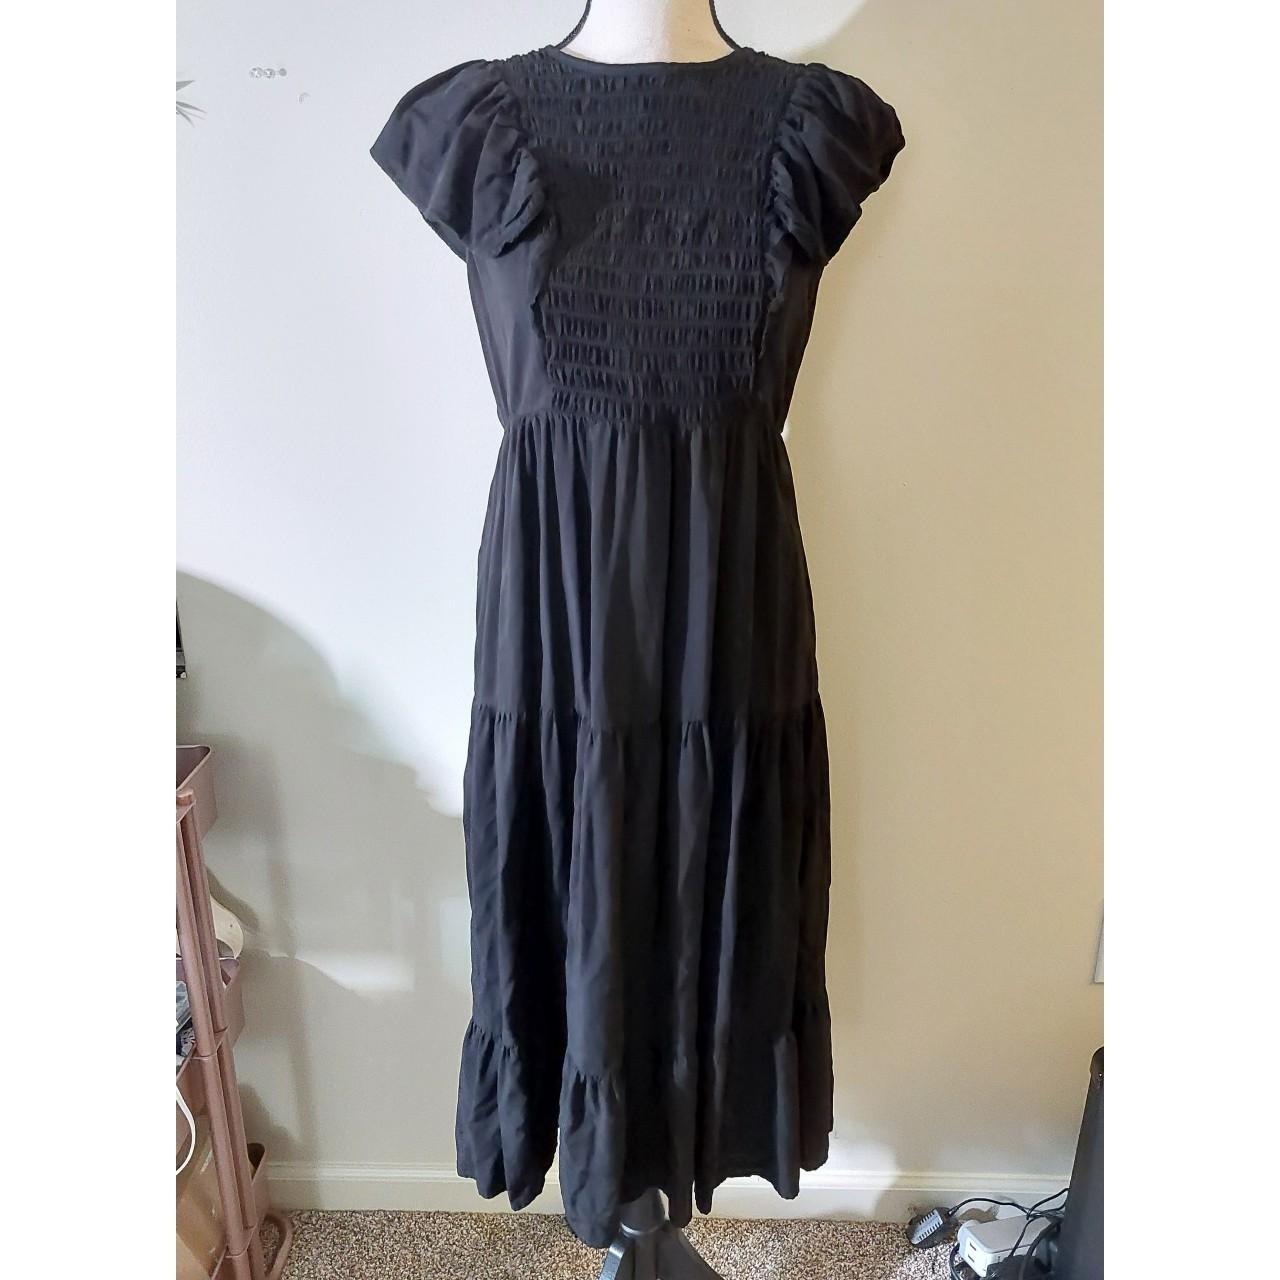 Black #Smocked #Tiered Dress. In great condition!... - Depop